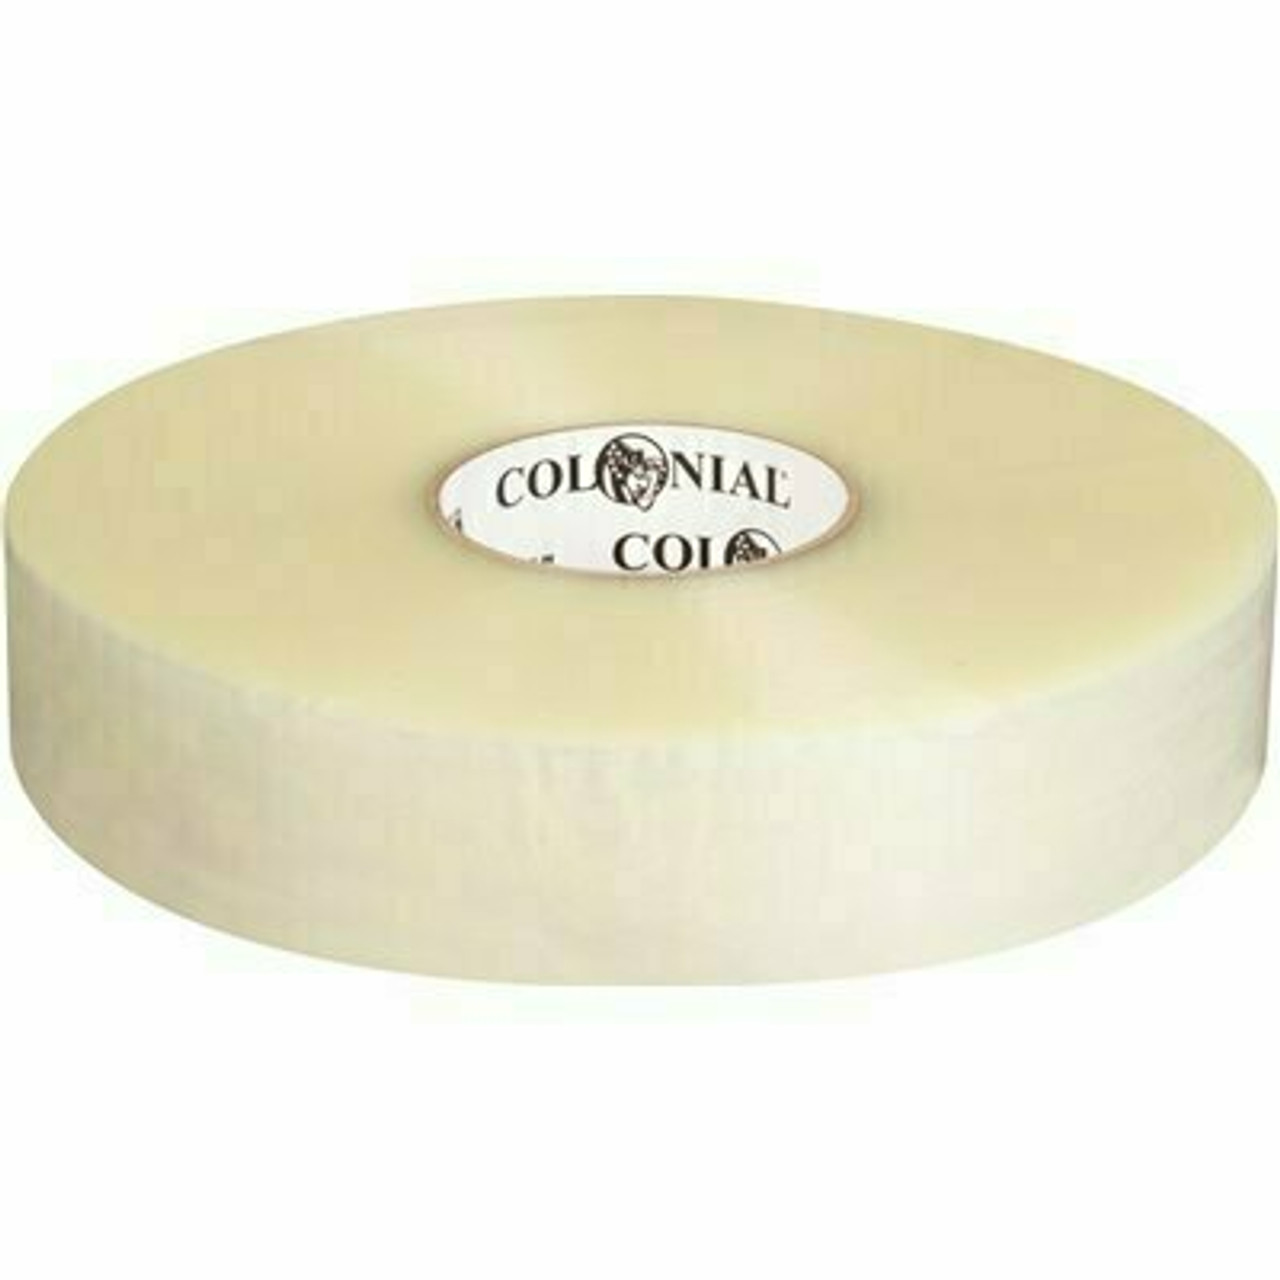 Colonial Hm 16 1.6 Mils 48 Mm X 914 M Economy Grade Packaging Tape, Clear (6-Rolls)